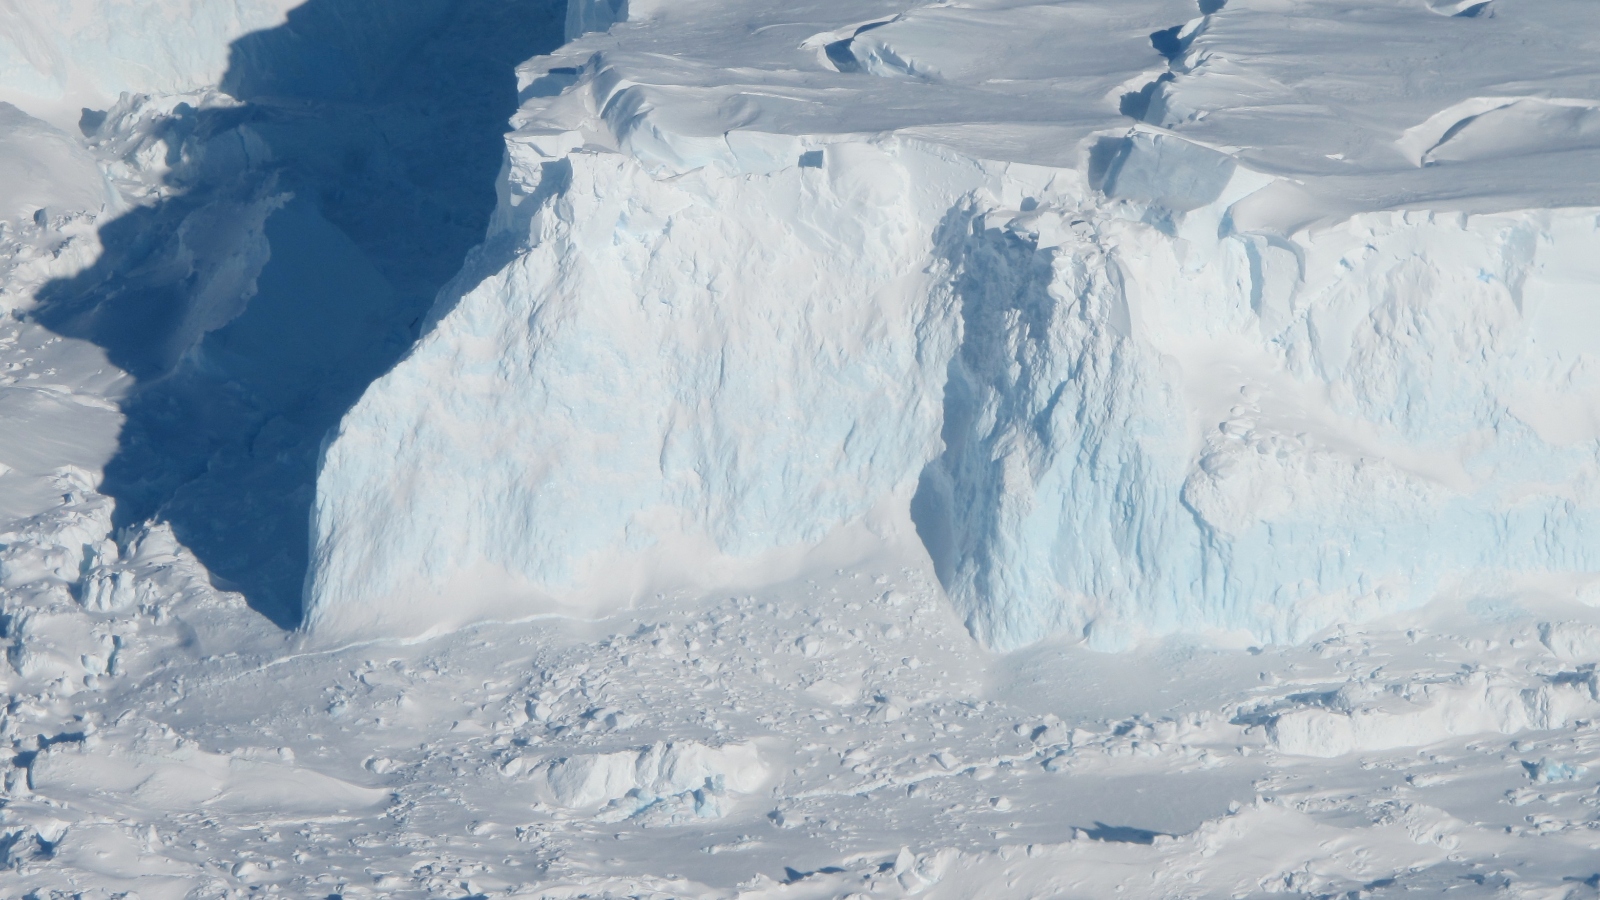 An aerial view of a massive bluish white chuck of snowy ice.